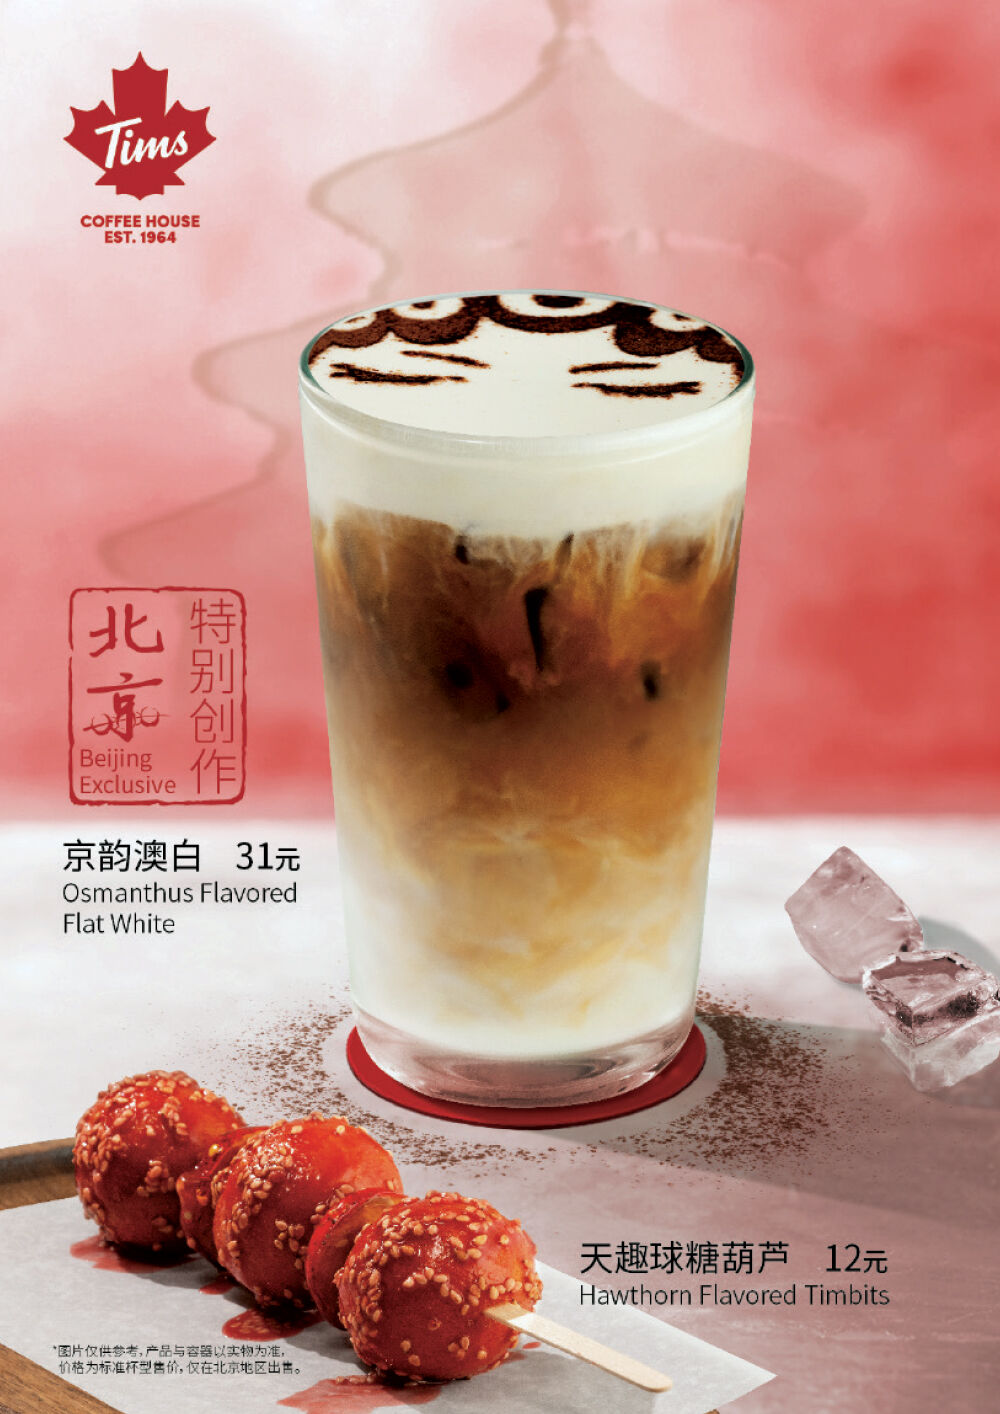 Tim Hortons and Cartesian Capital Group launch Chinese Master Franchise JV  - Private Capital Journal